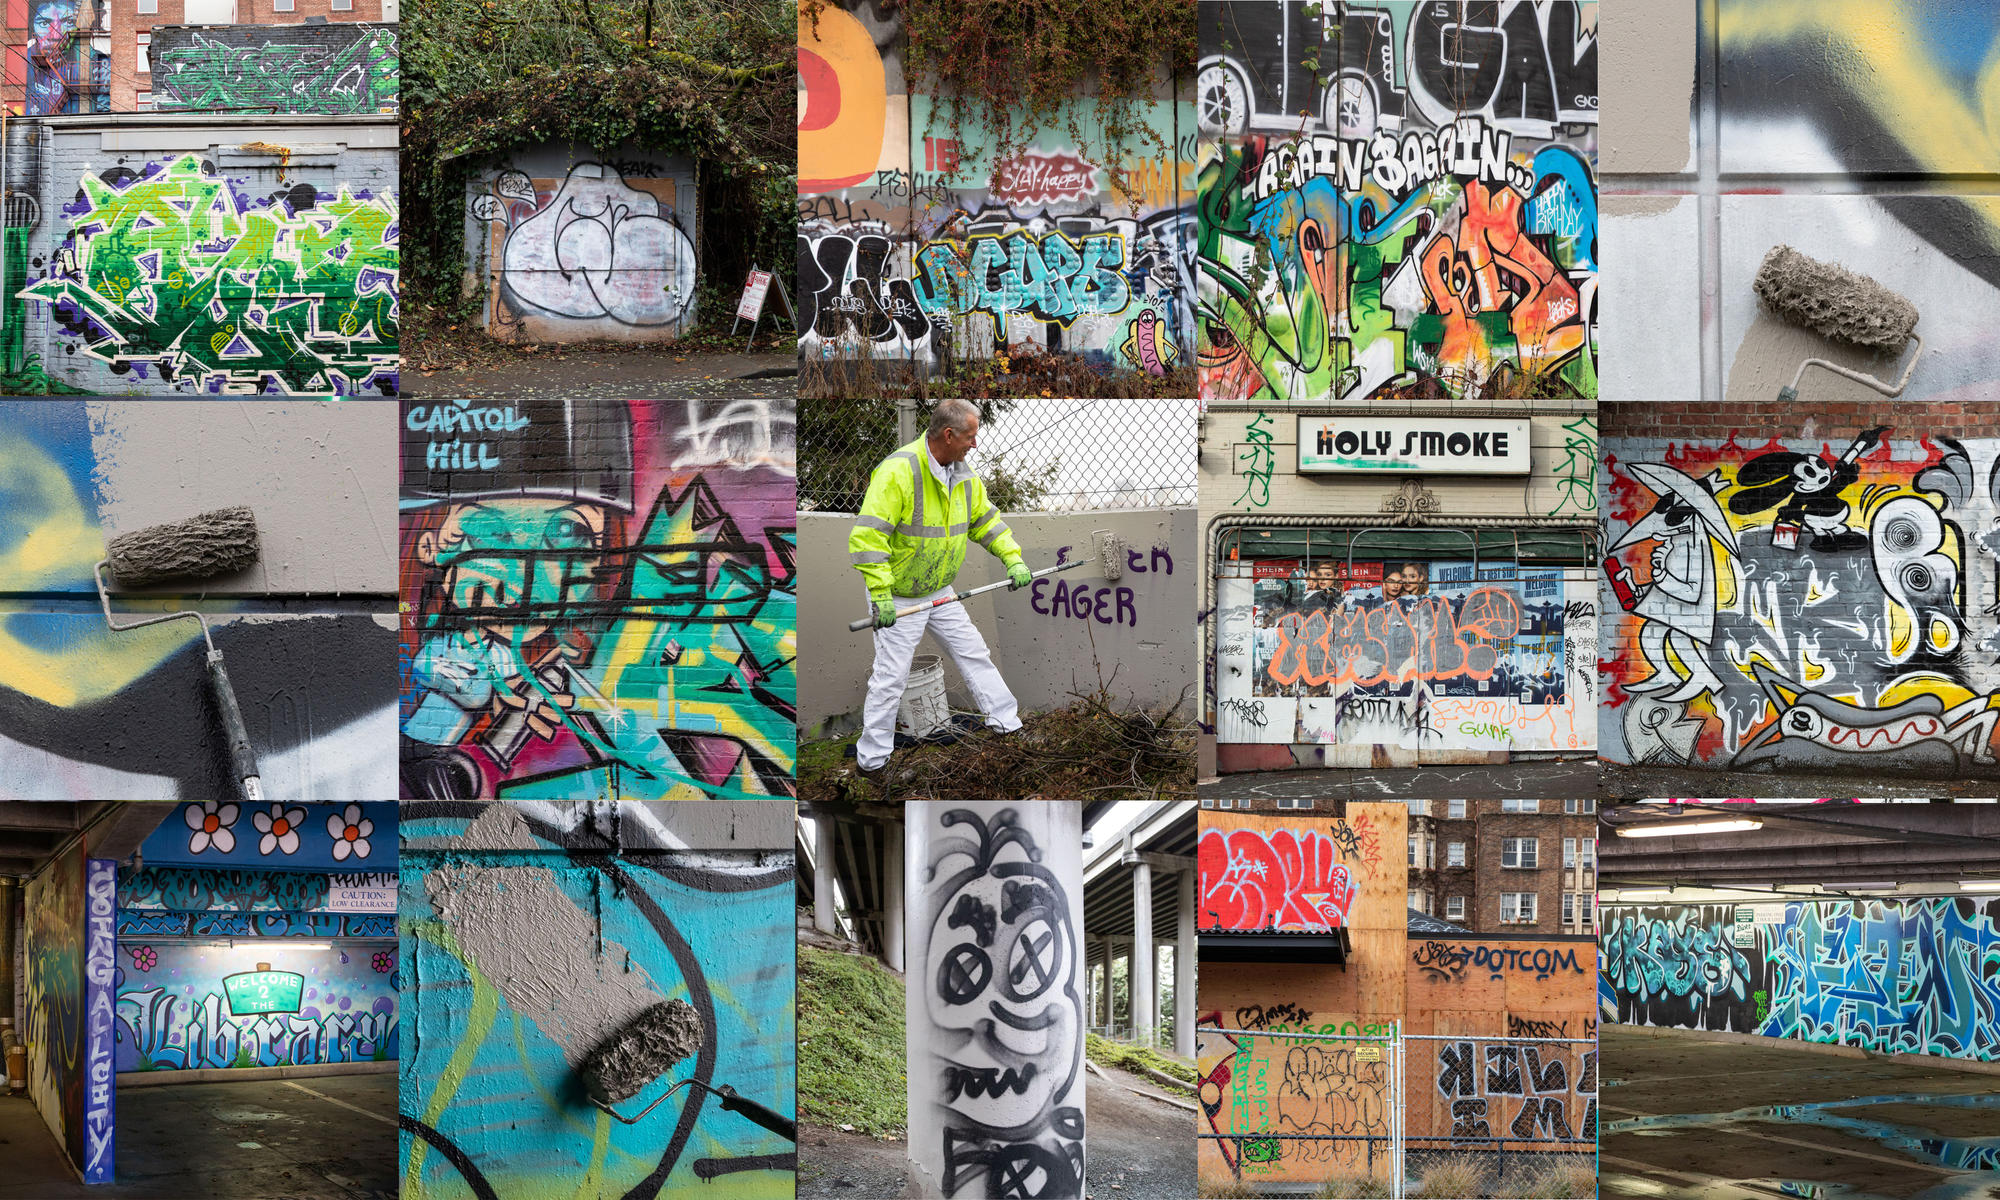 A 3x5 grid of photos of colorful graffiti around the city, with some images showing paint brushes covering up the graffiti tags